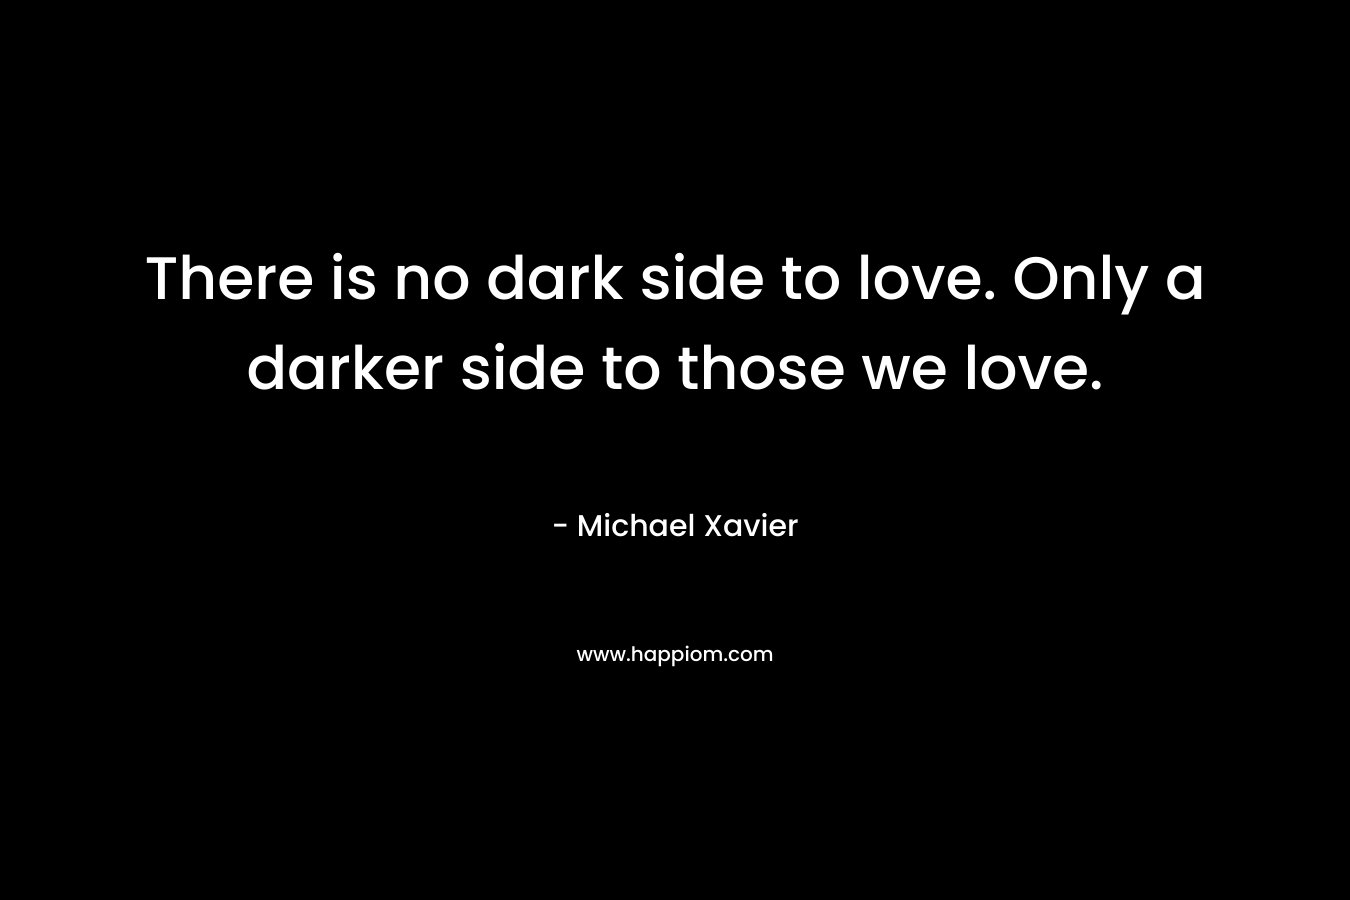 There is no dark side to love. Only a darker side to those we love.